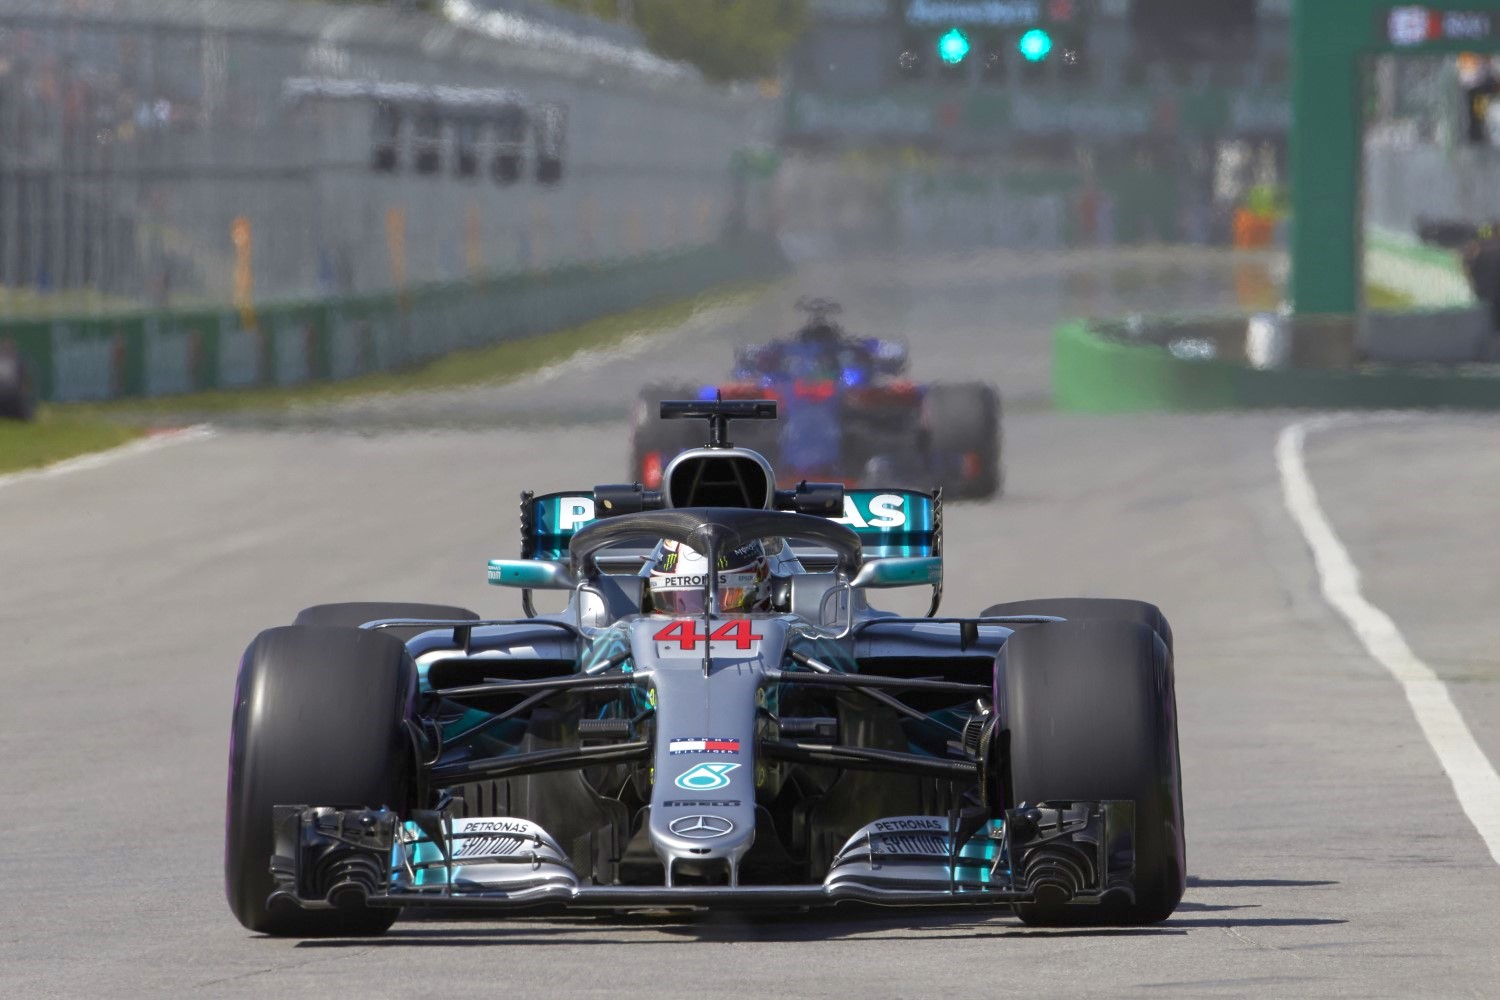 Lewis Hamilton was beaten soundly b his teammate all weekend in Canada - this on a track where Hamilton dominates